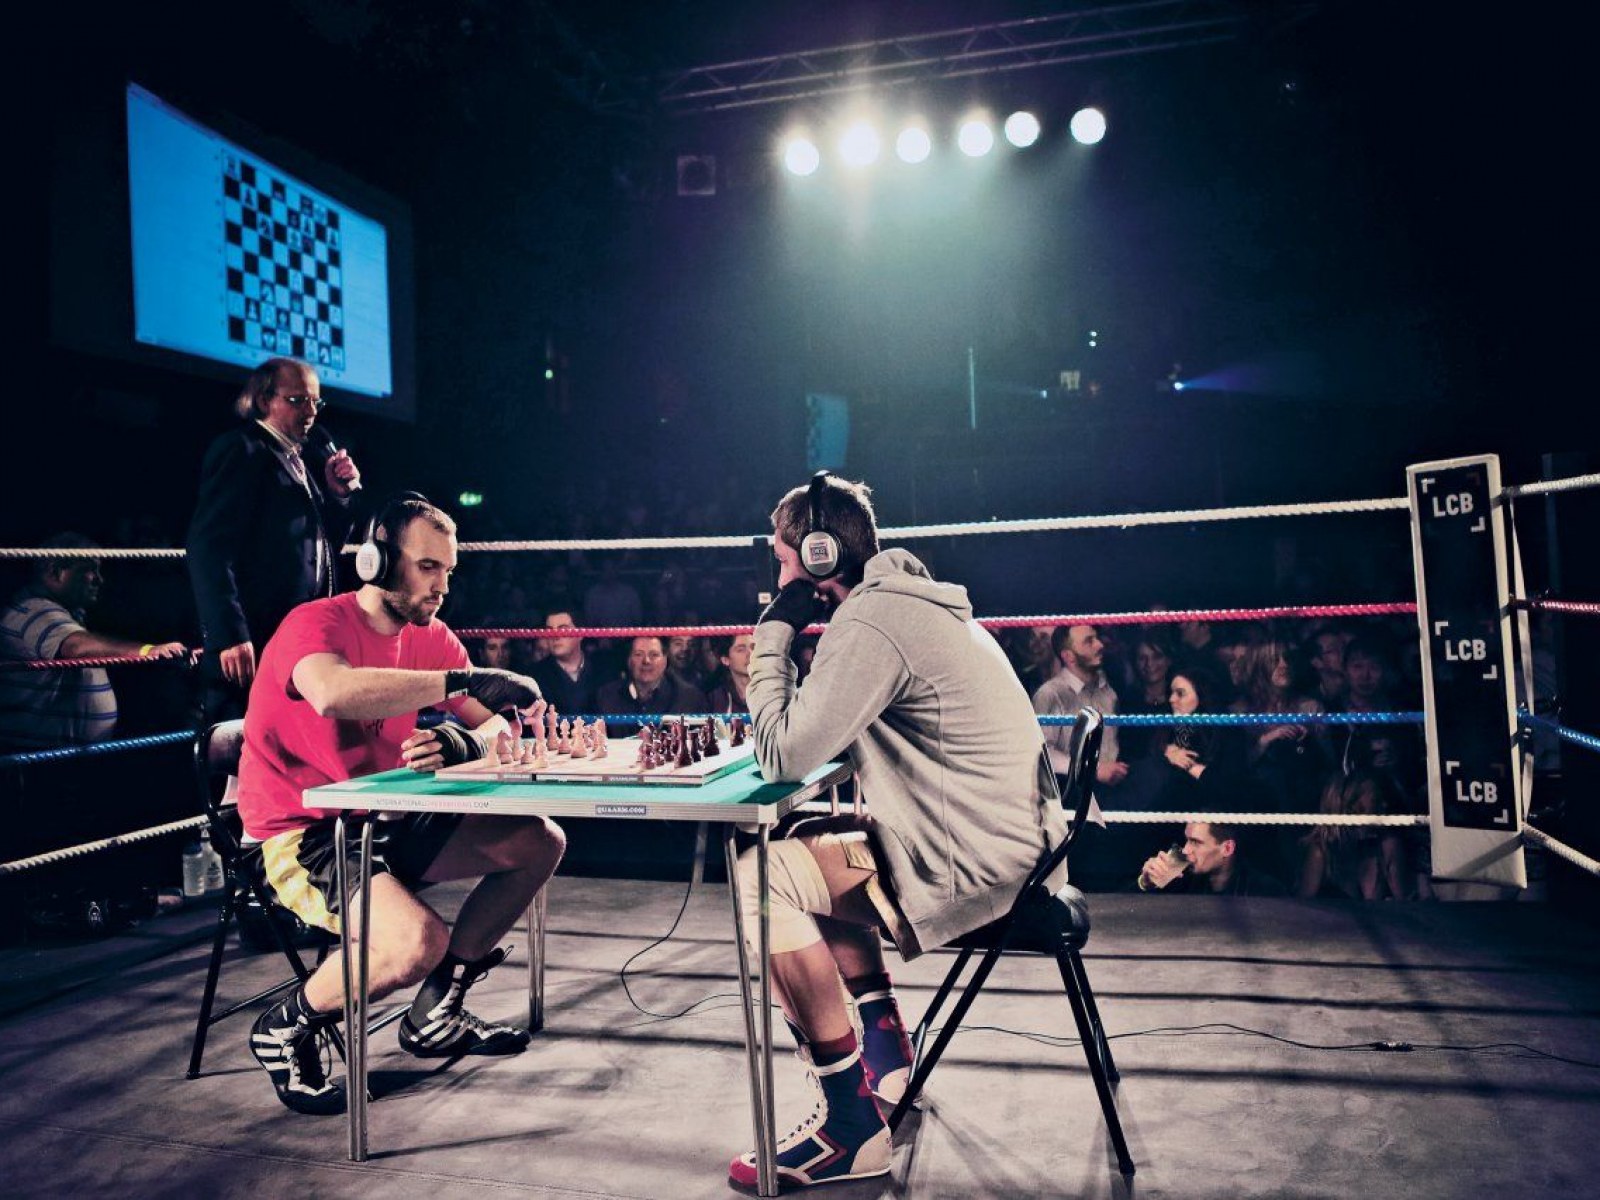 The Russians are coming – in chessboxing